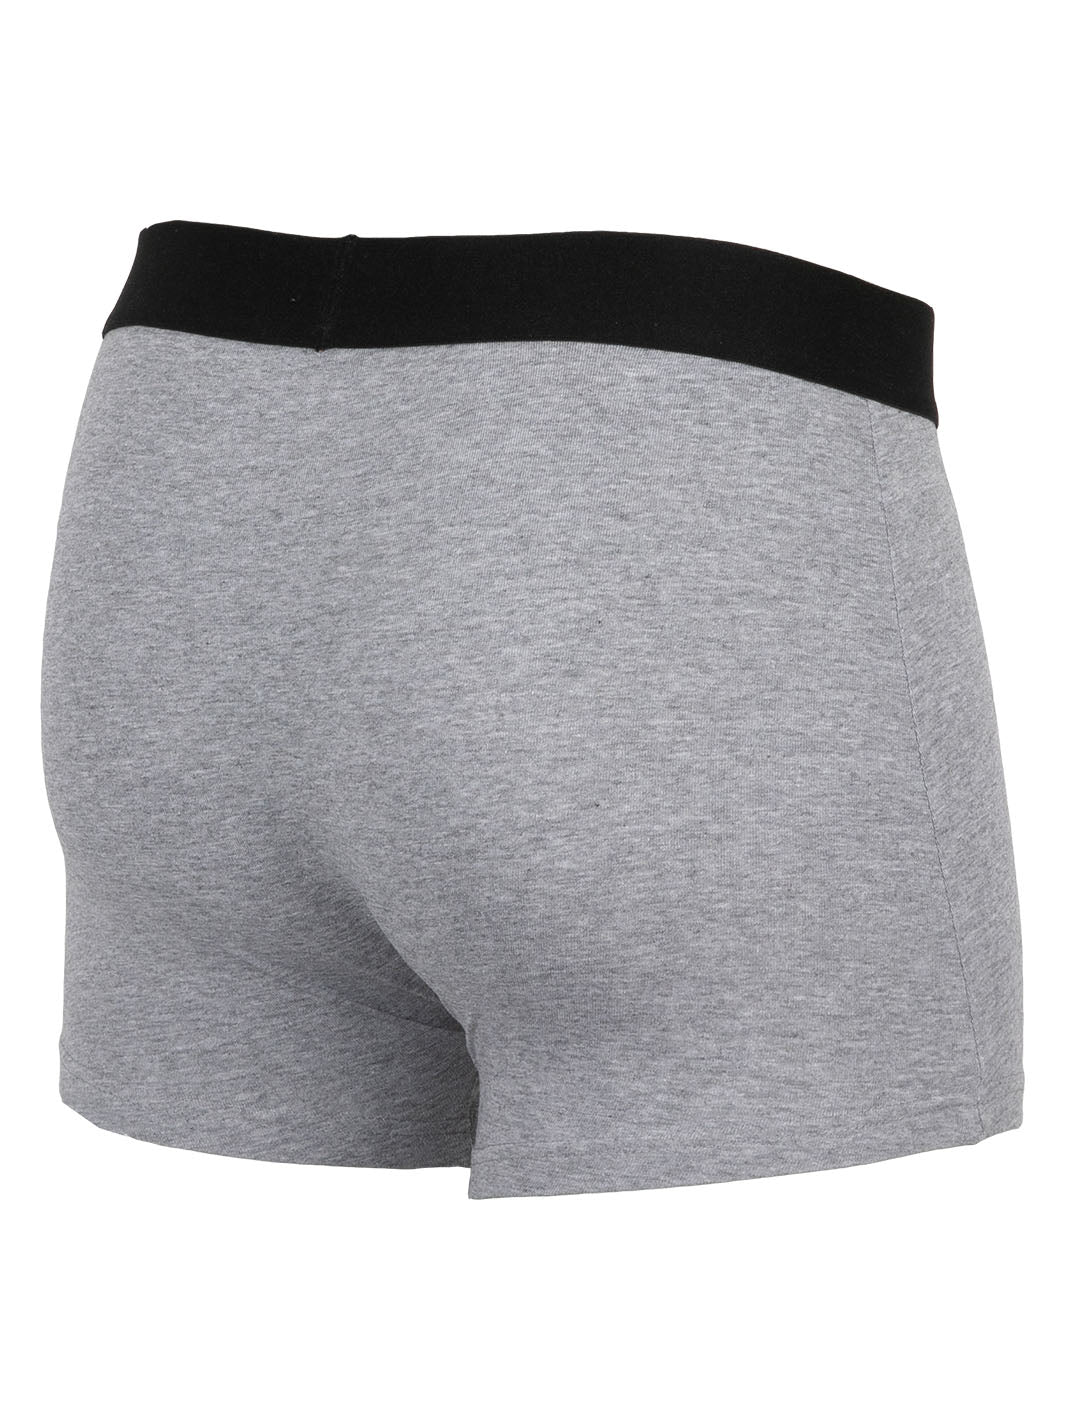 TRYHARDER - Boxer - Grau 1 Pack